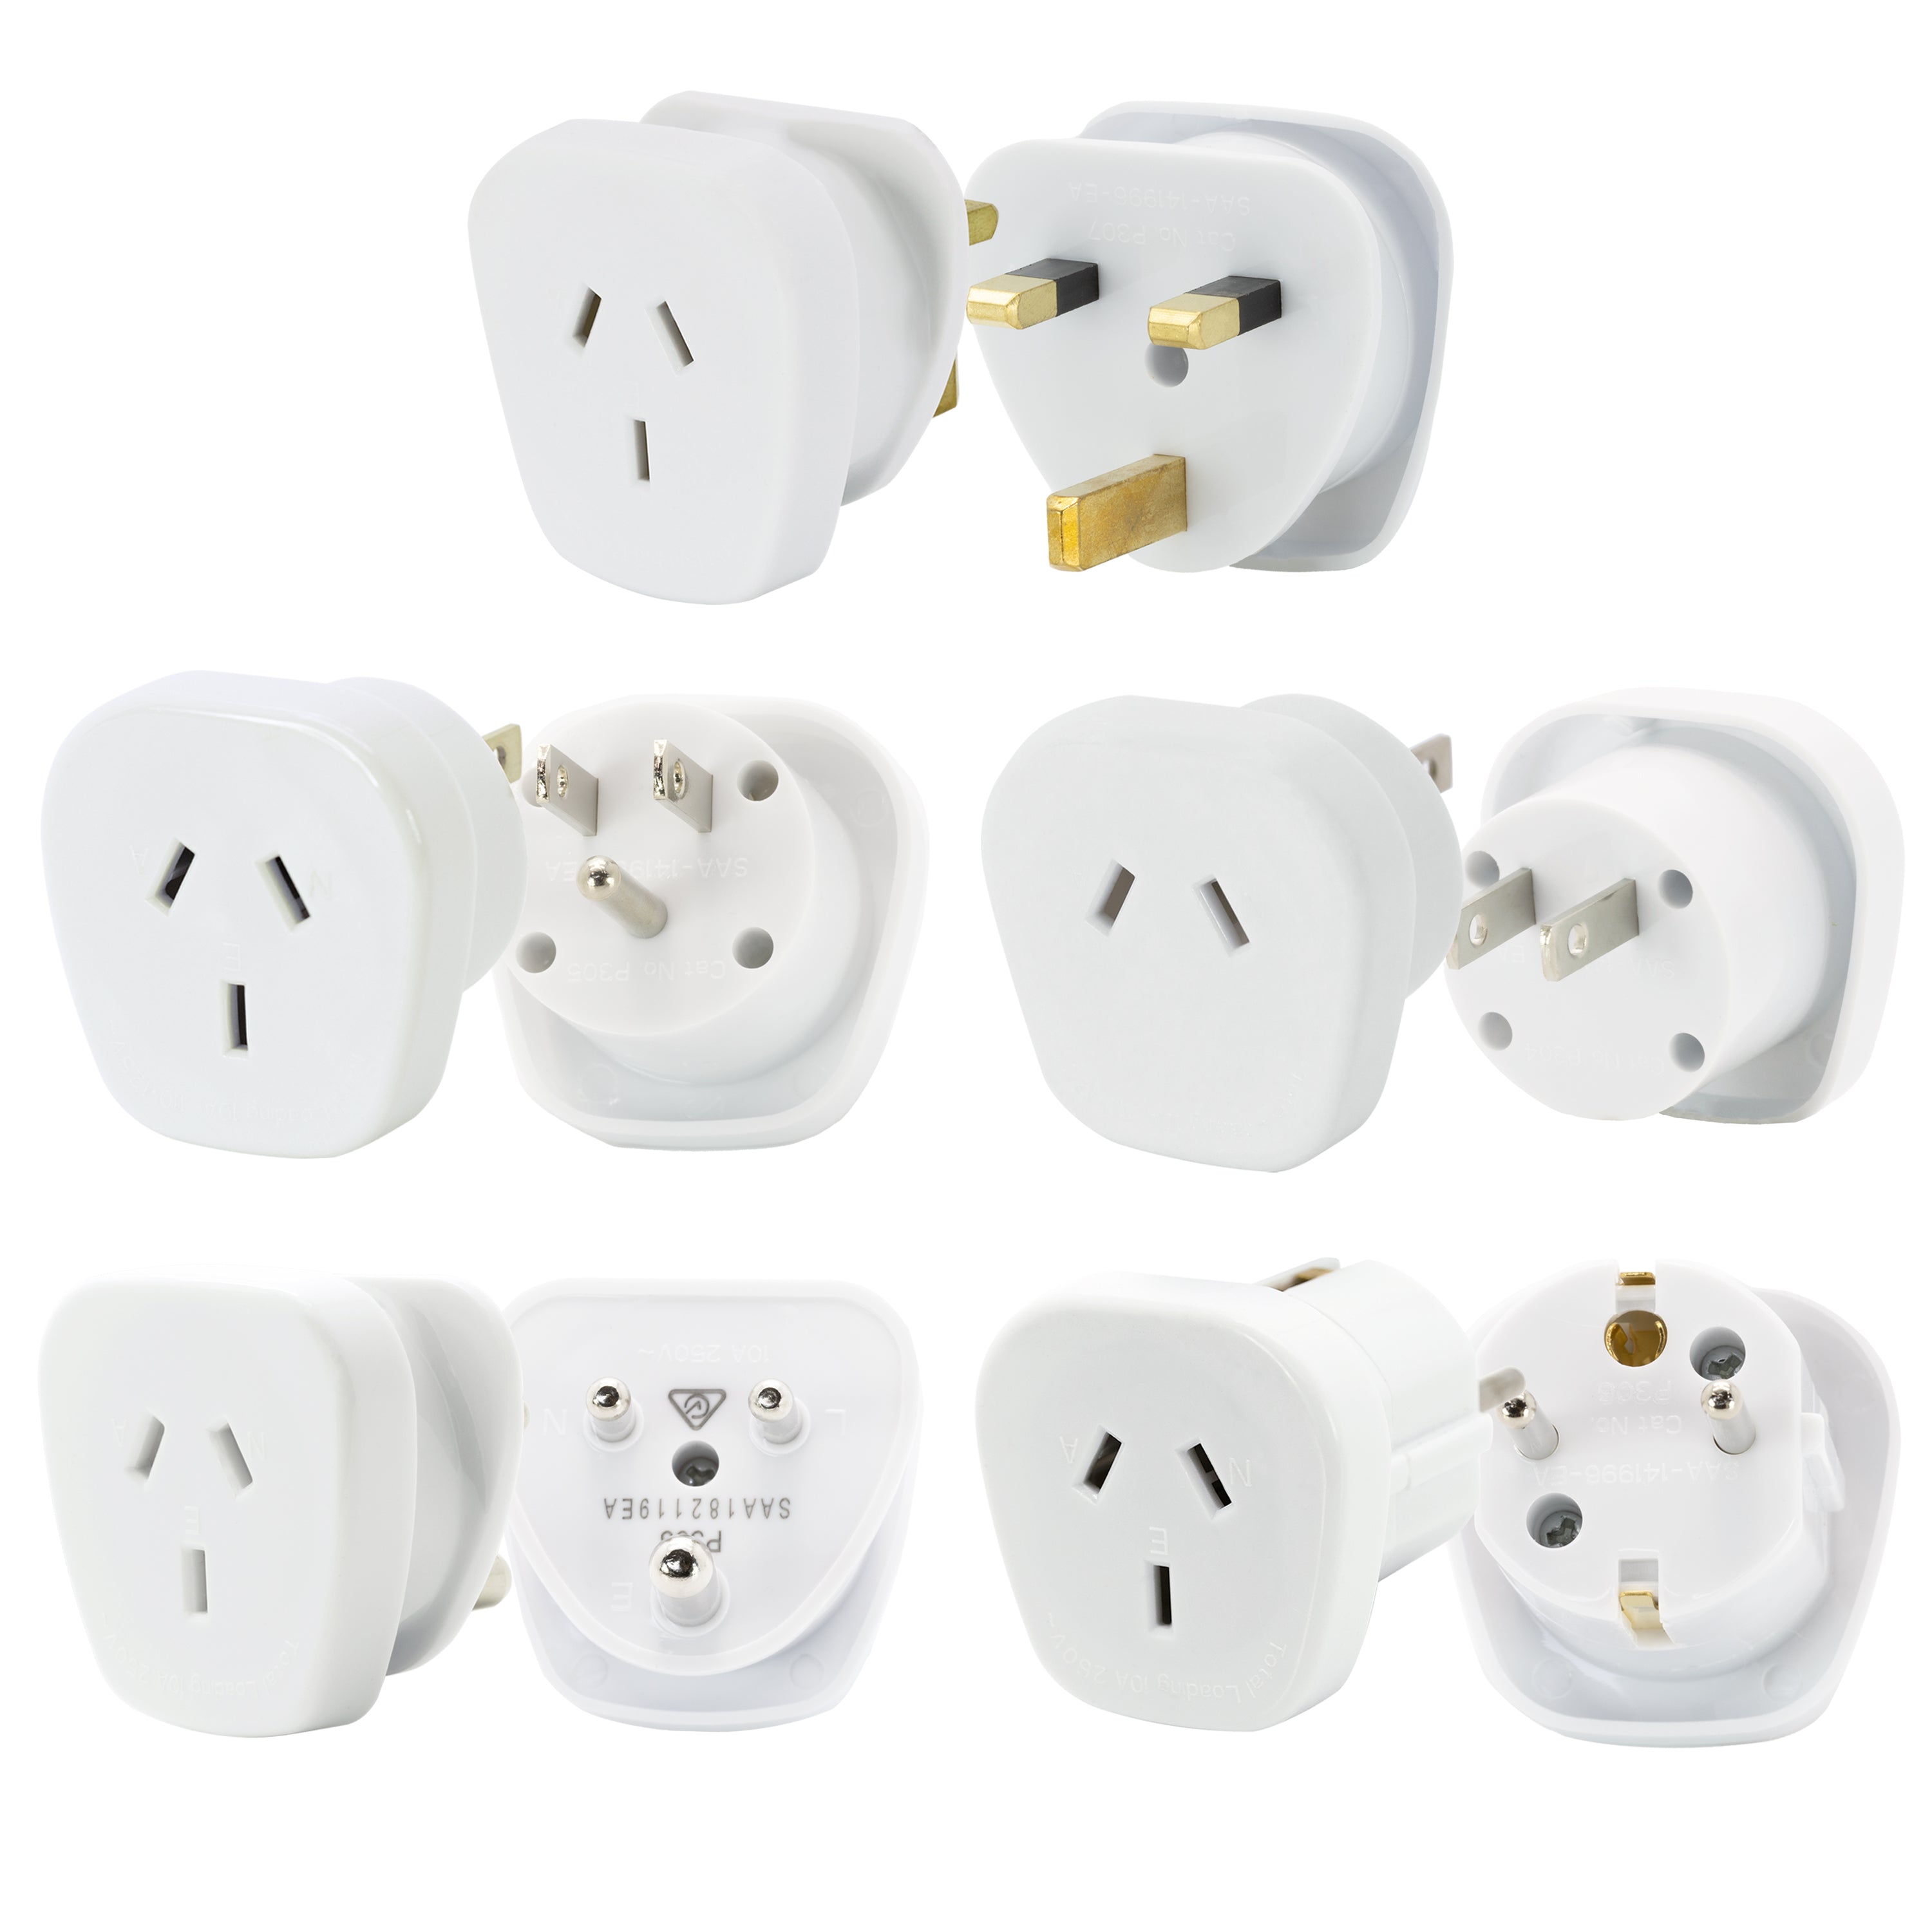 Outbound Travel Adaptors - For AU/NZ Socket to Foreign Plug